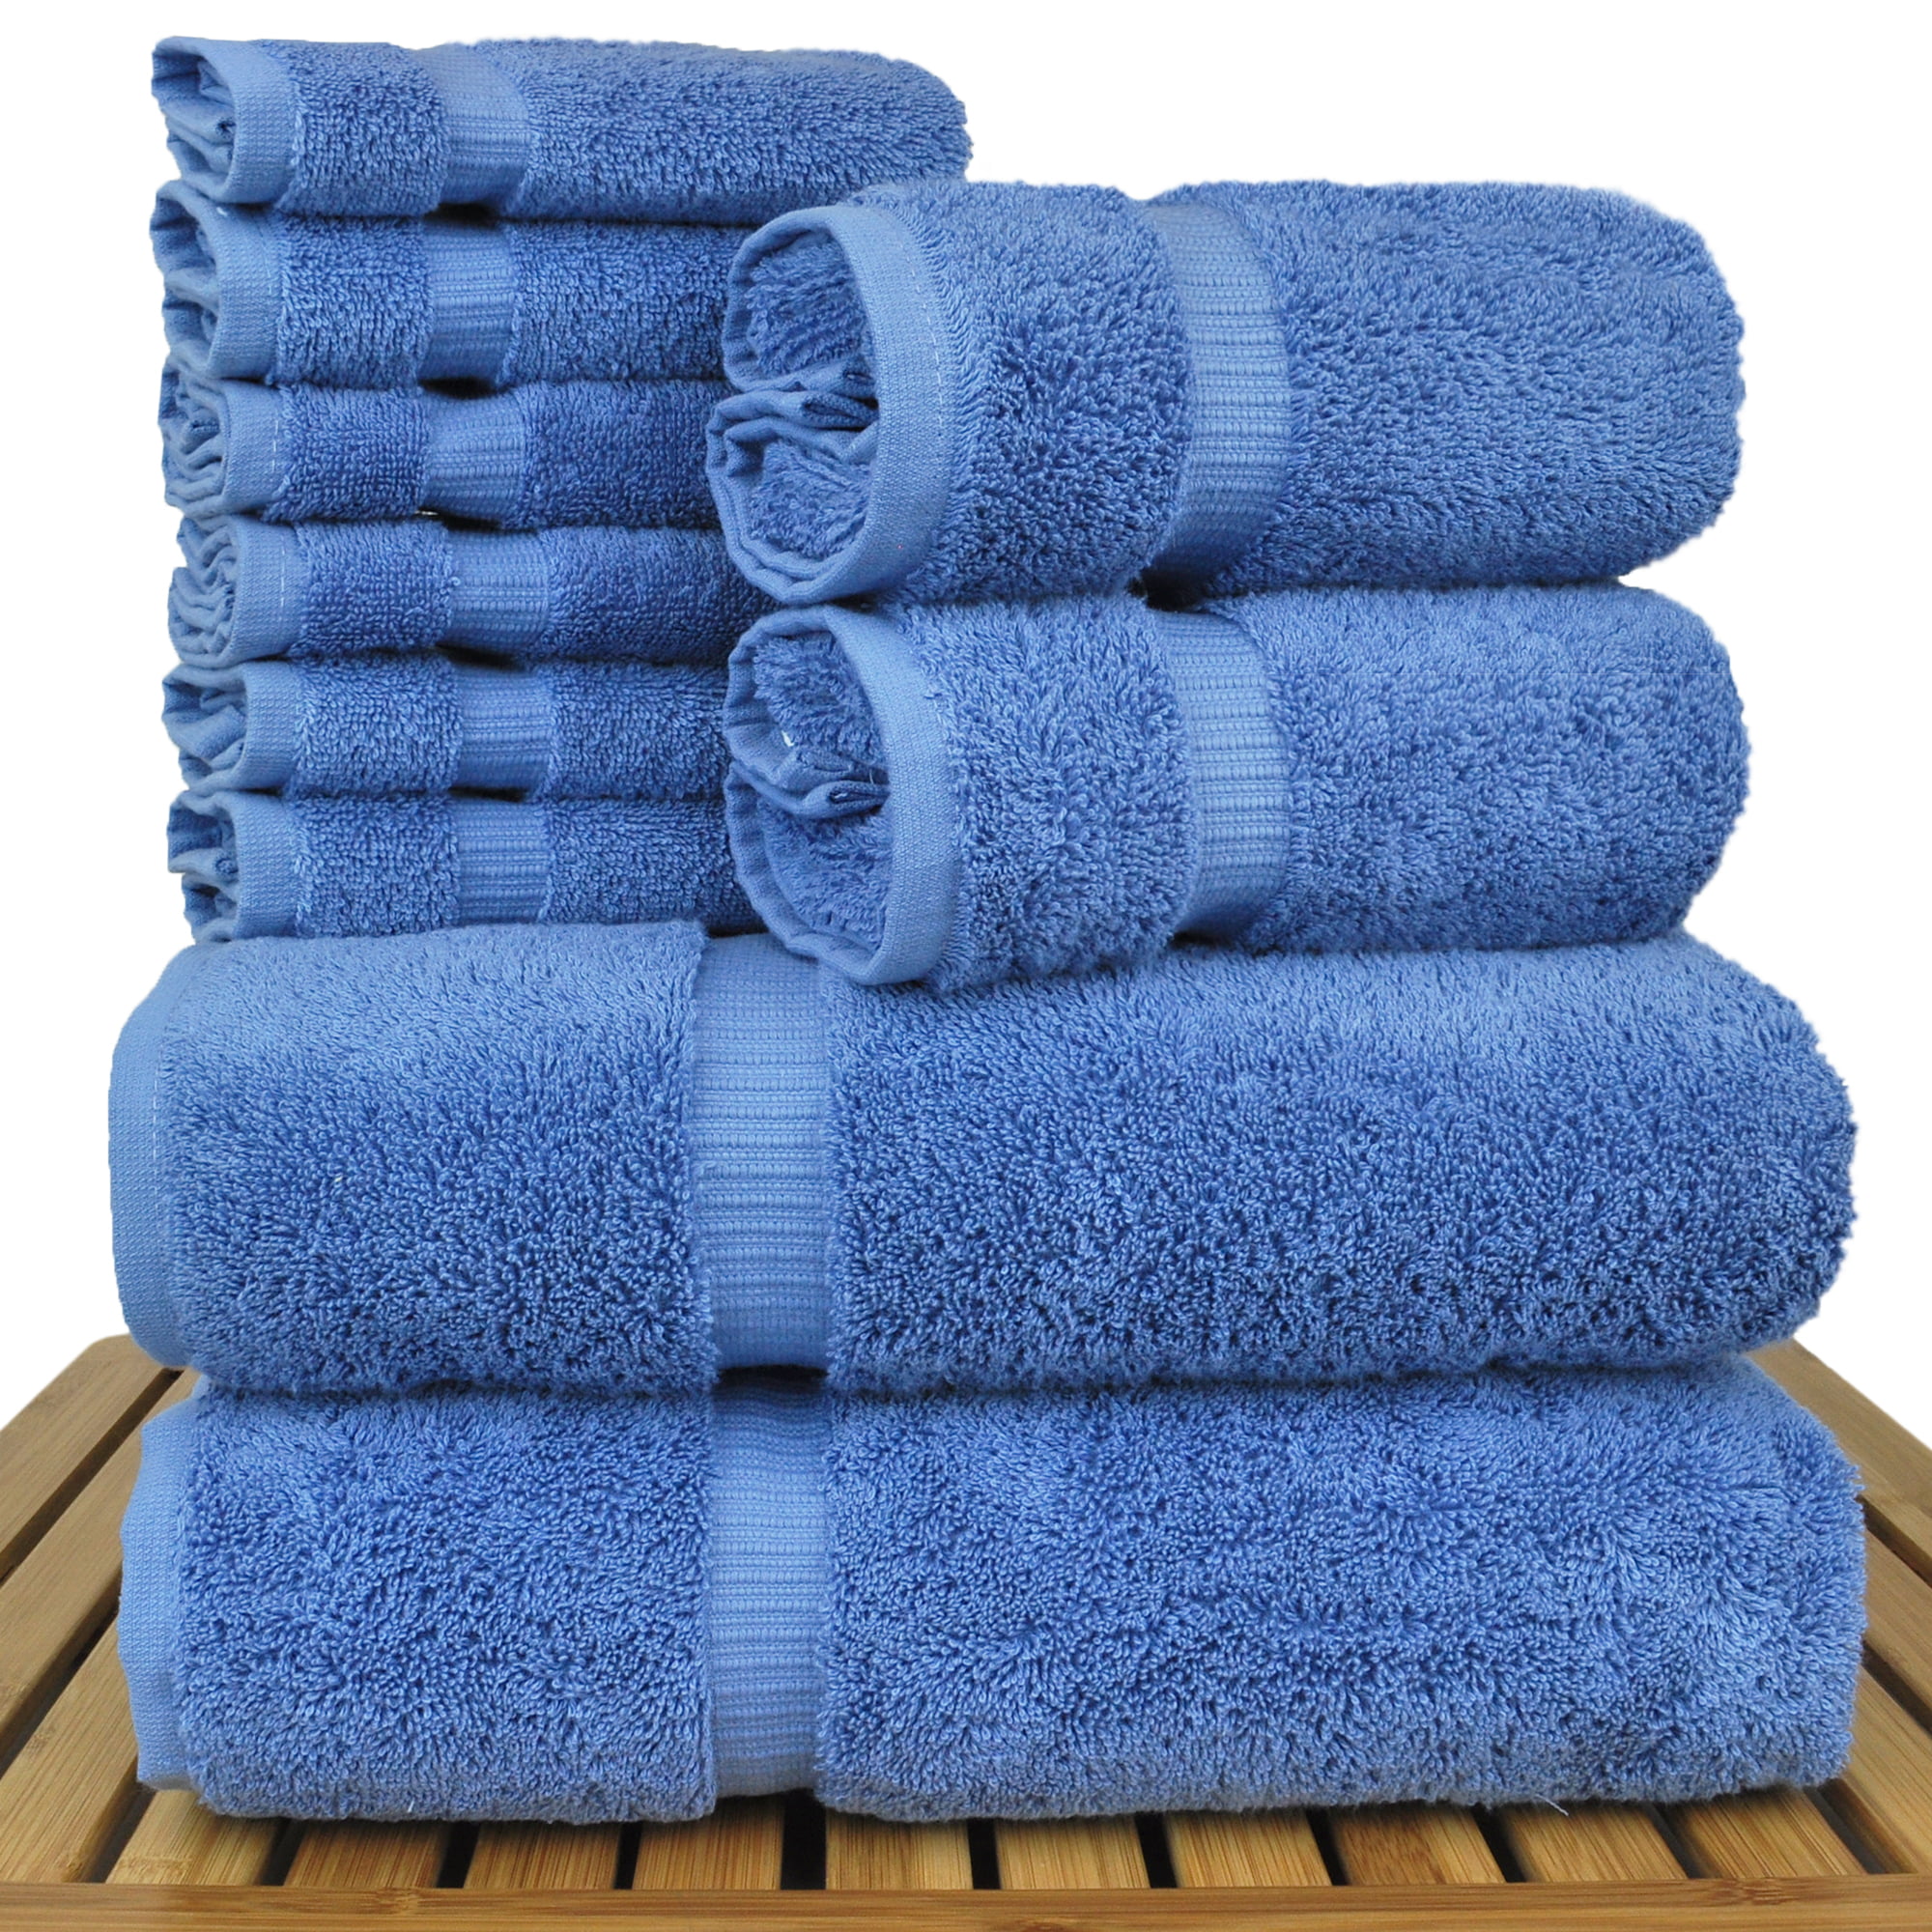  Mosobam 700 GSM Hotel Luxury Hand Towels 16X30, Set of 4,  Allure Blue, Turkish Hand Towels, Viscose Made from Bamboo - Turkish Cotton  : Industrial & Scientific